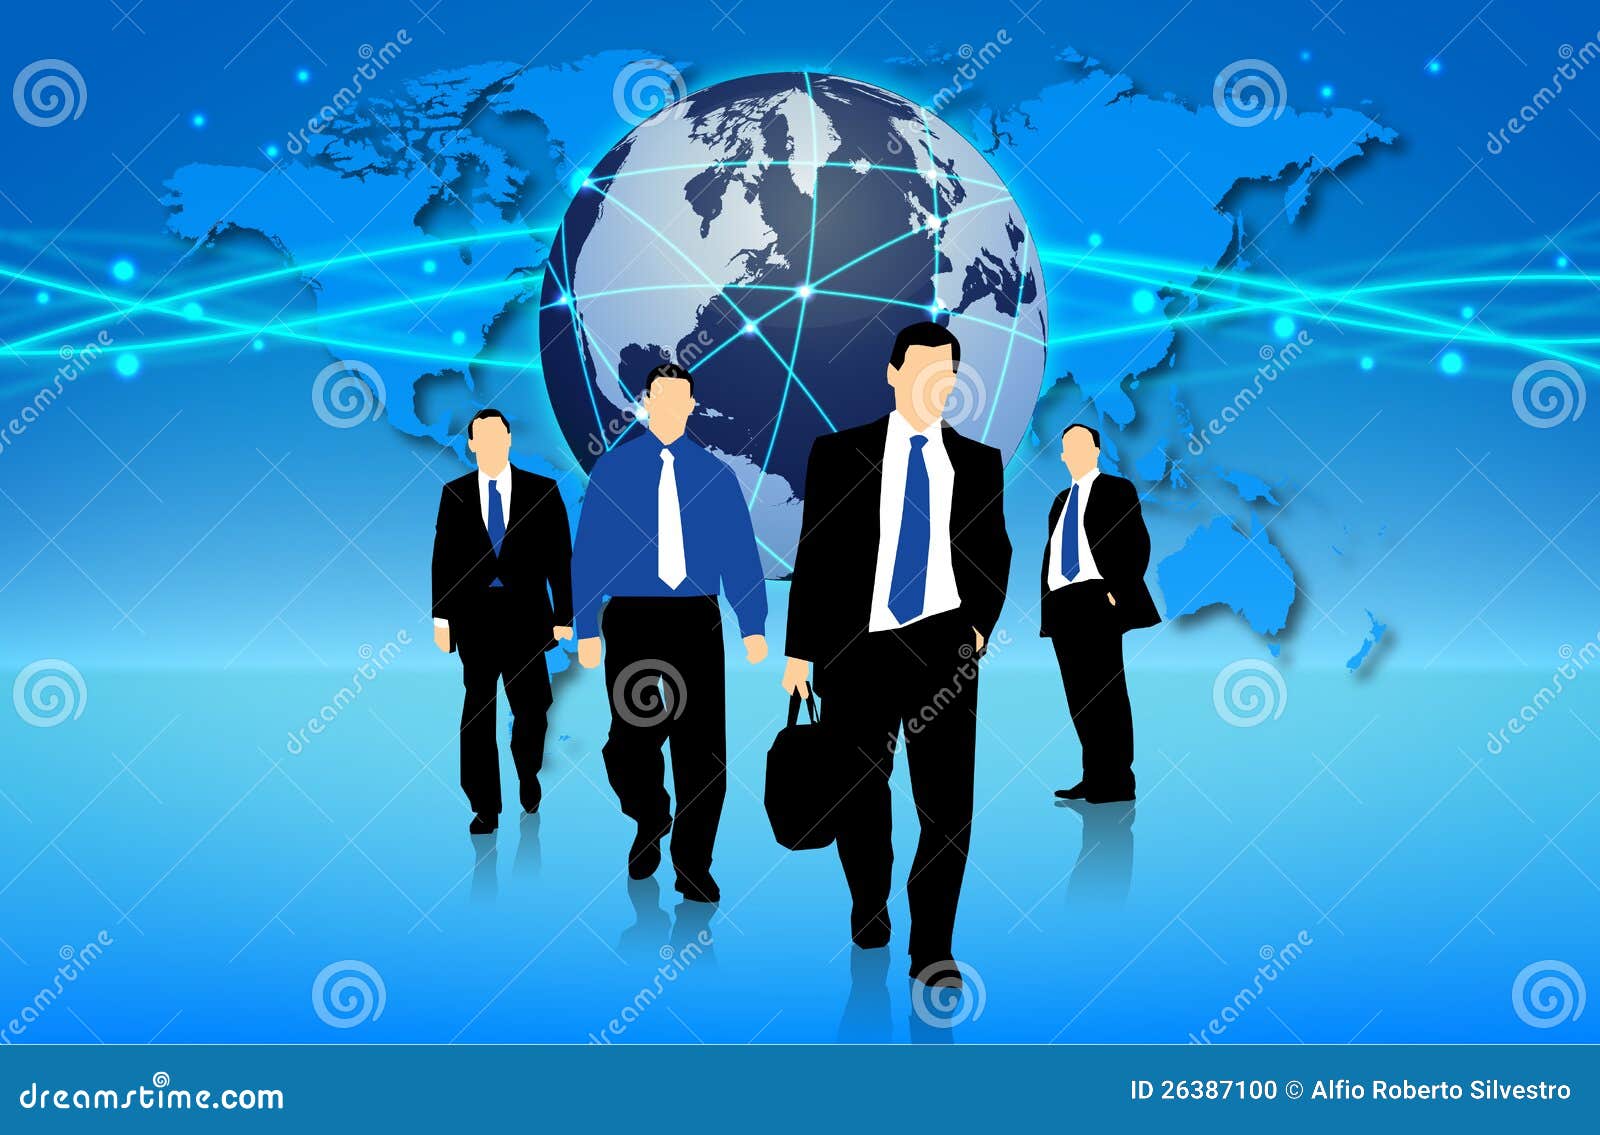 global business clipart - photo #25